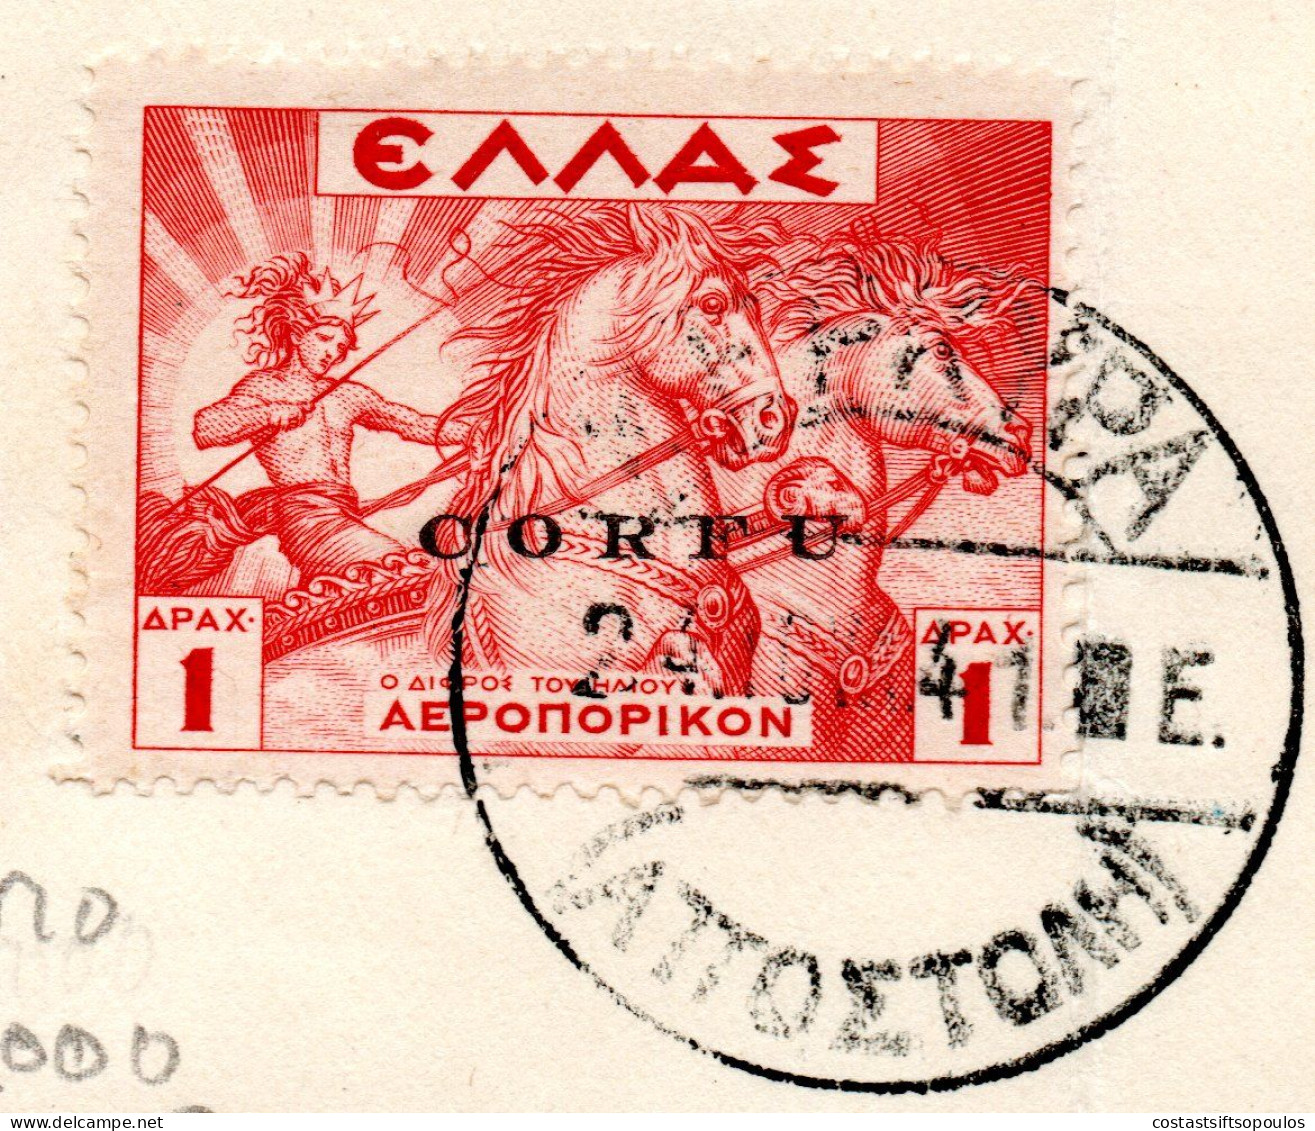 2643..GREECE,ITALY,IONIAN,CORFU,1941 AIRPOST HELLAS 20-31(-29 100 DR.}ON PAPER, CERTIFIED 15/8/41,13 SCANS - Isole Ioniche